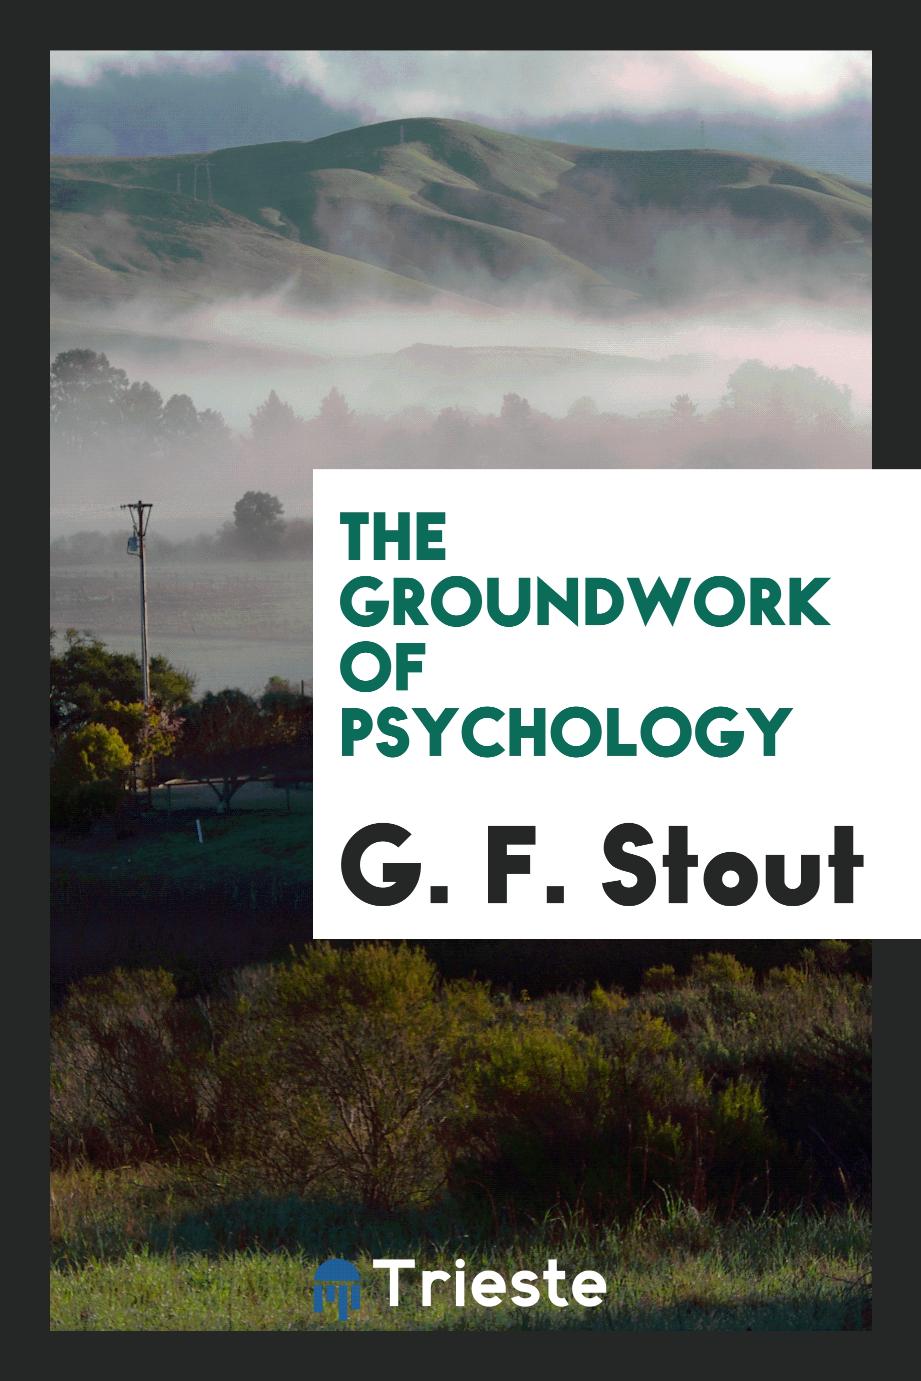 G. F. Stout - The groundwork of psychology